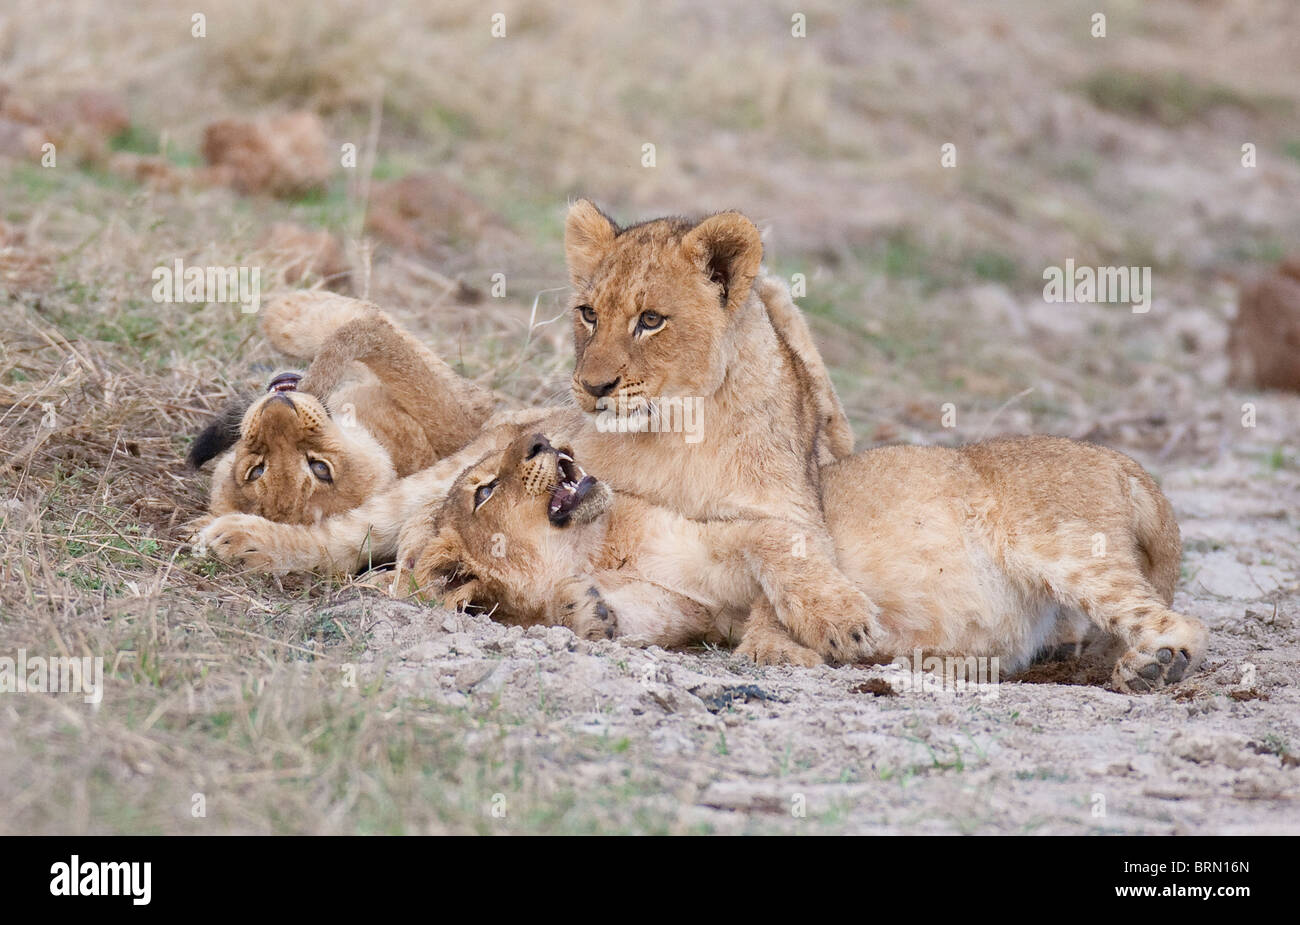 Lion cubs playing with each other Stock Photo